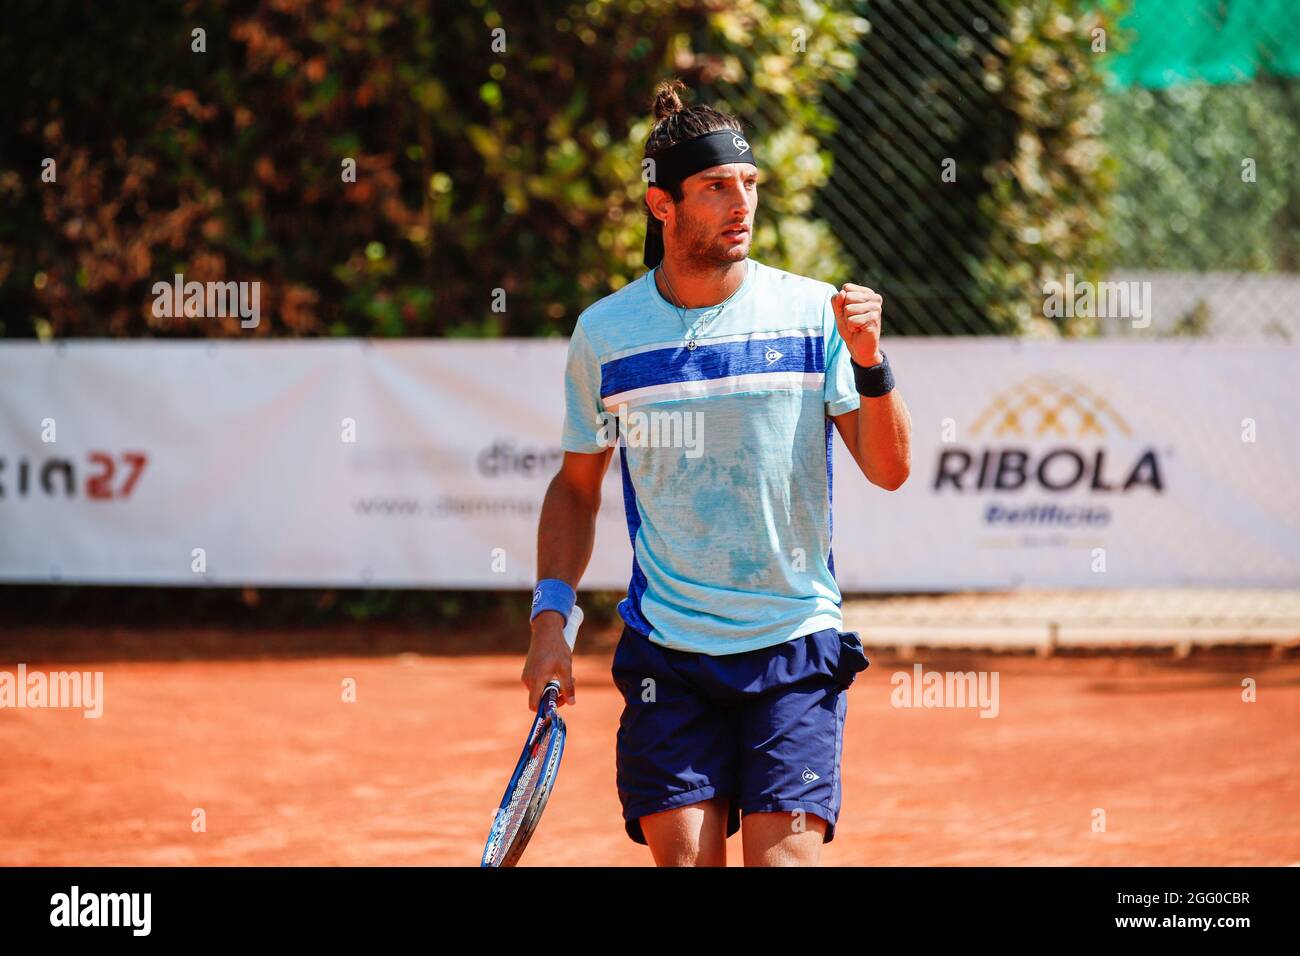 Andrea Picchione from Italy during Lesa Cup 2021 - ITF, Tennis Internationals in Lesa (NO), Italy, August 27 2021 Stock Photo